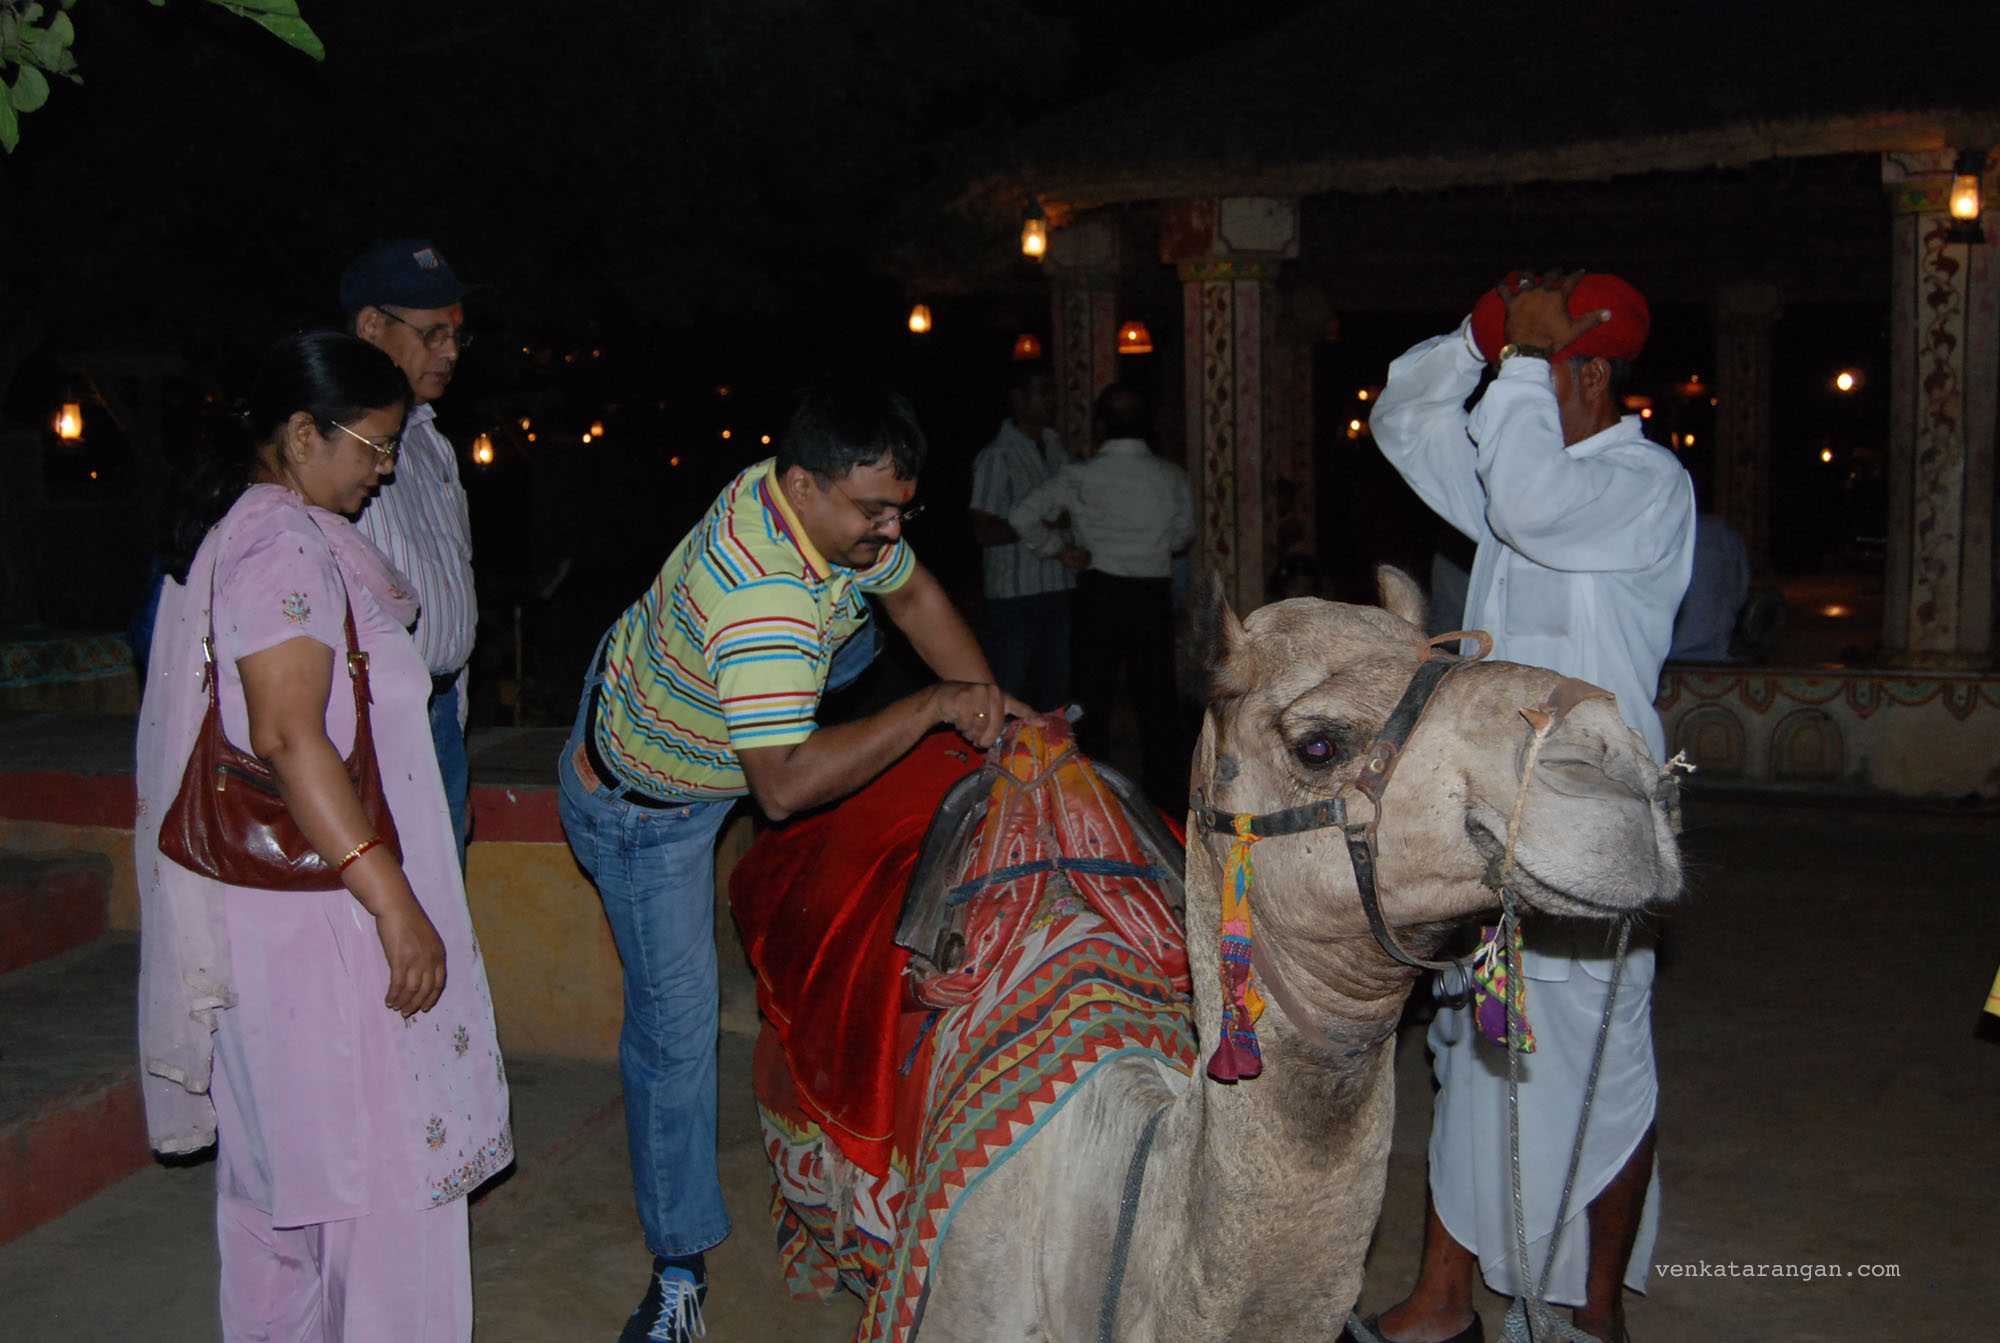 Getting to ride a camel in Chokhi Dhani